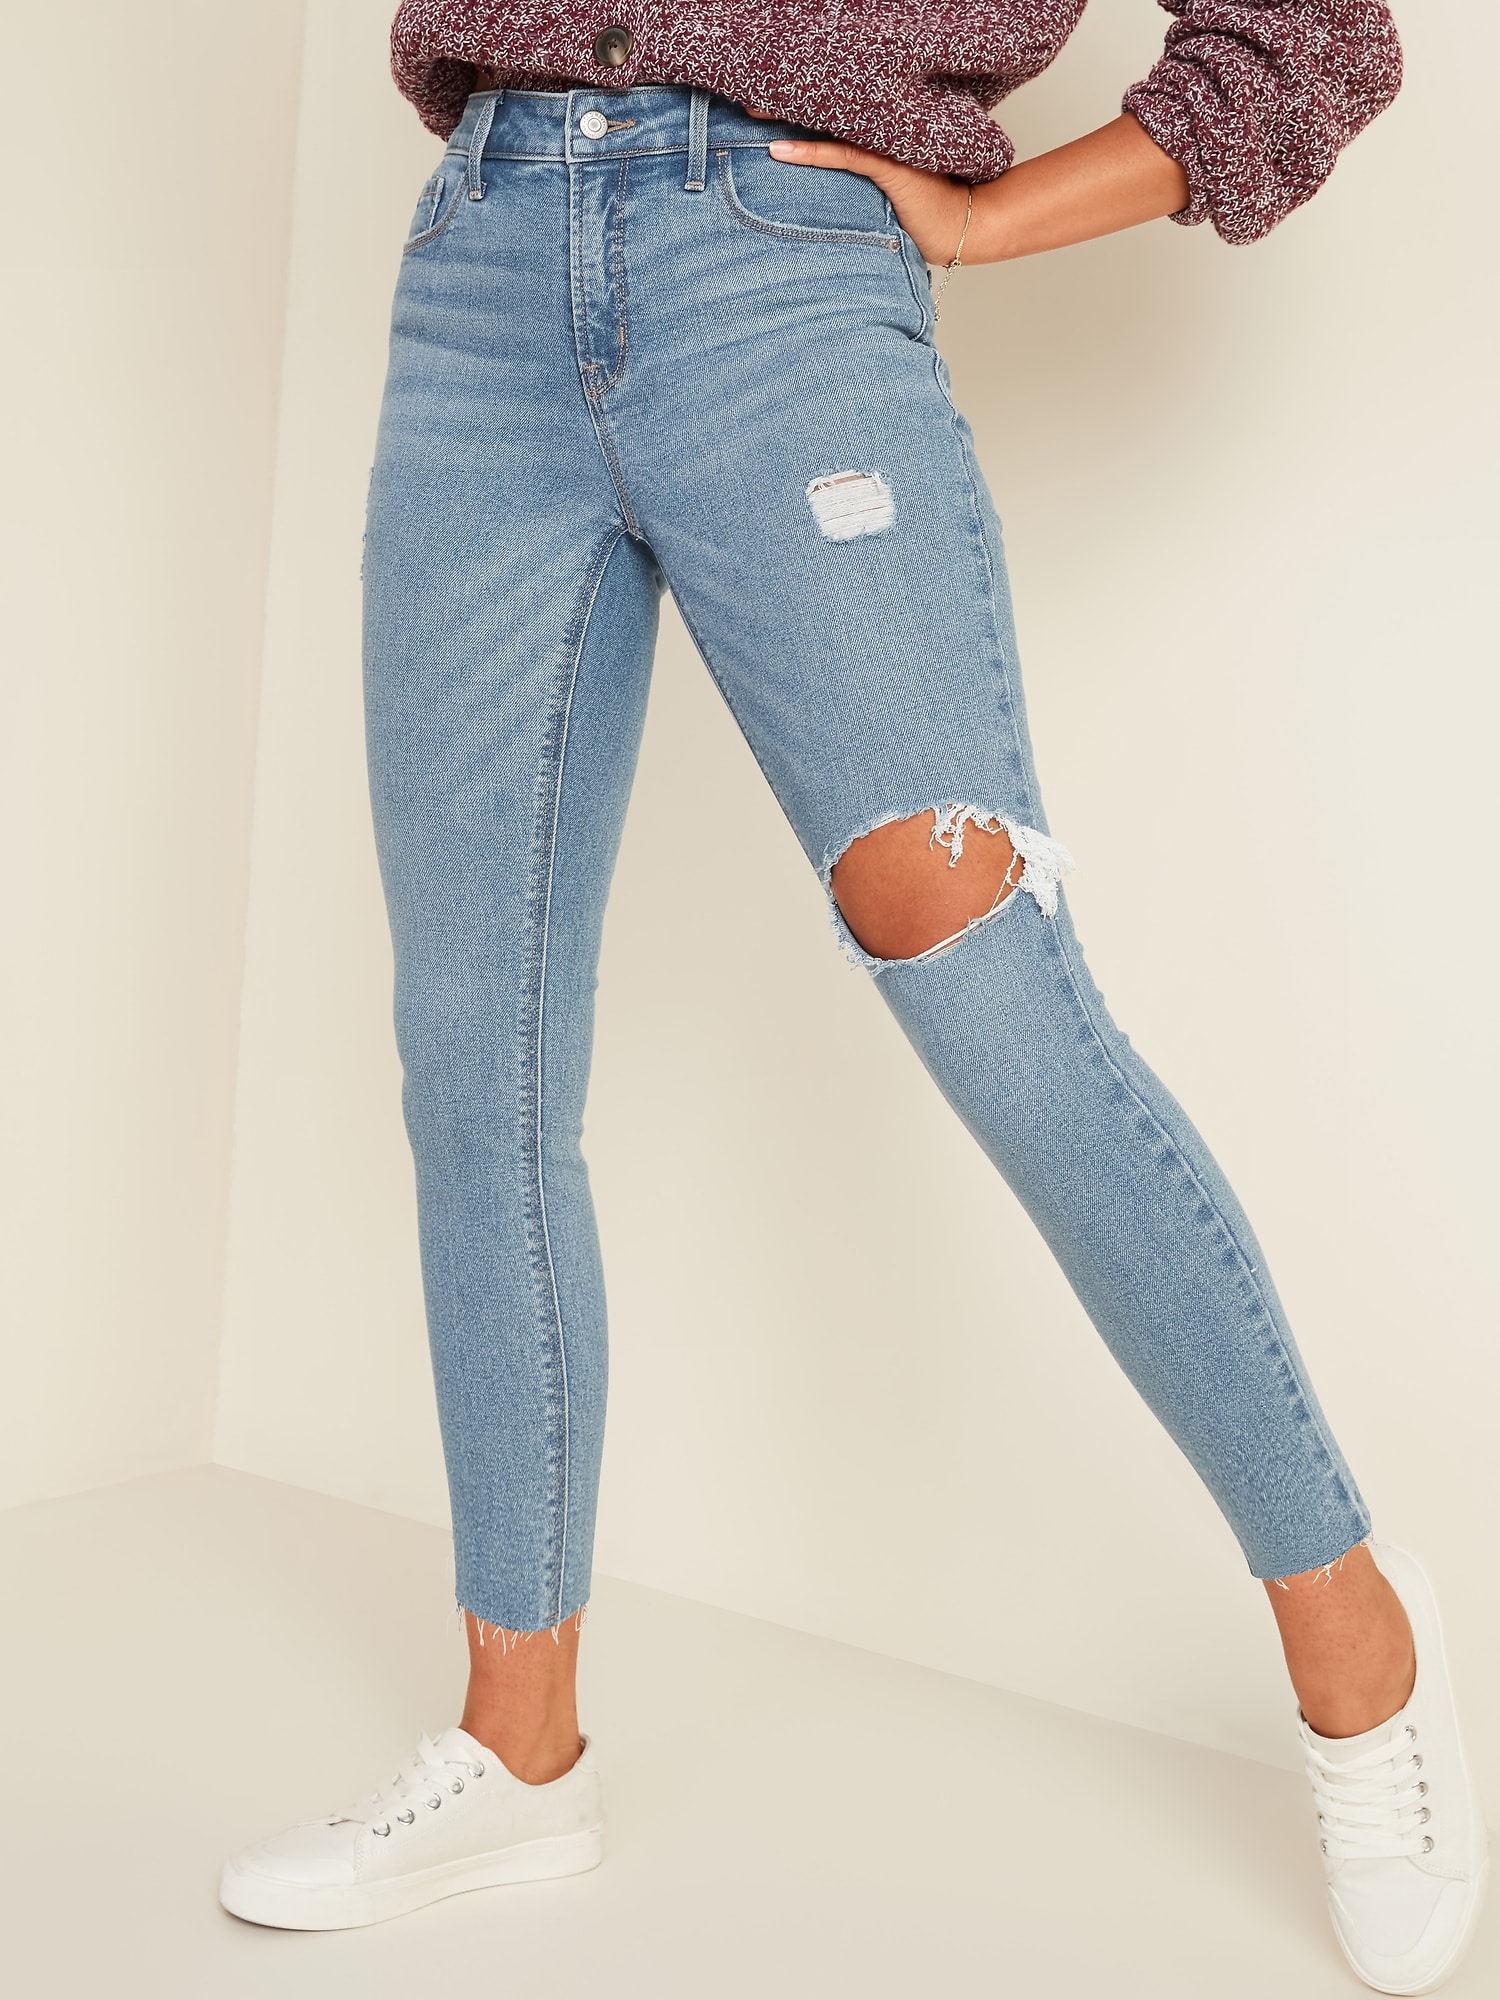 Women's High-Rise Ripped Light Wash Super Skinny Jeans